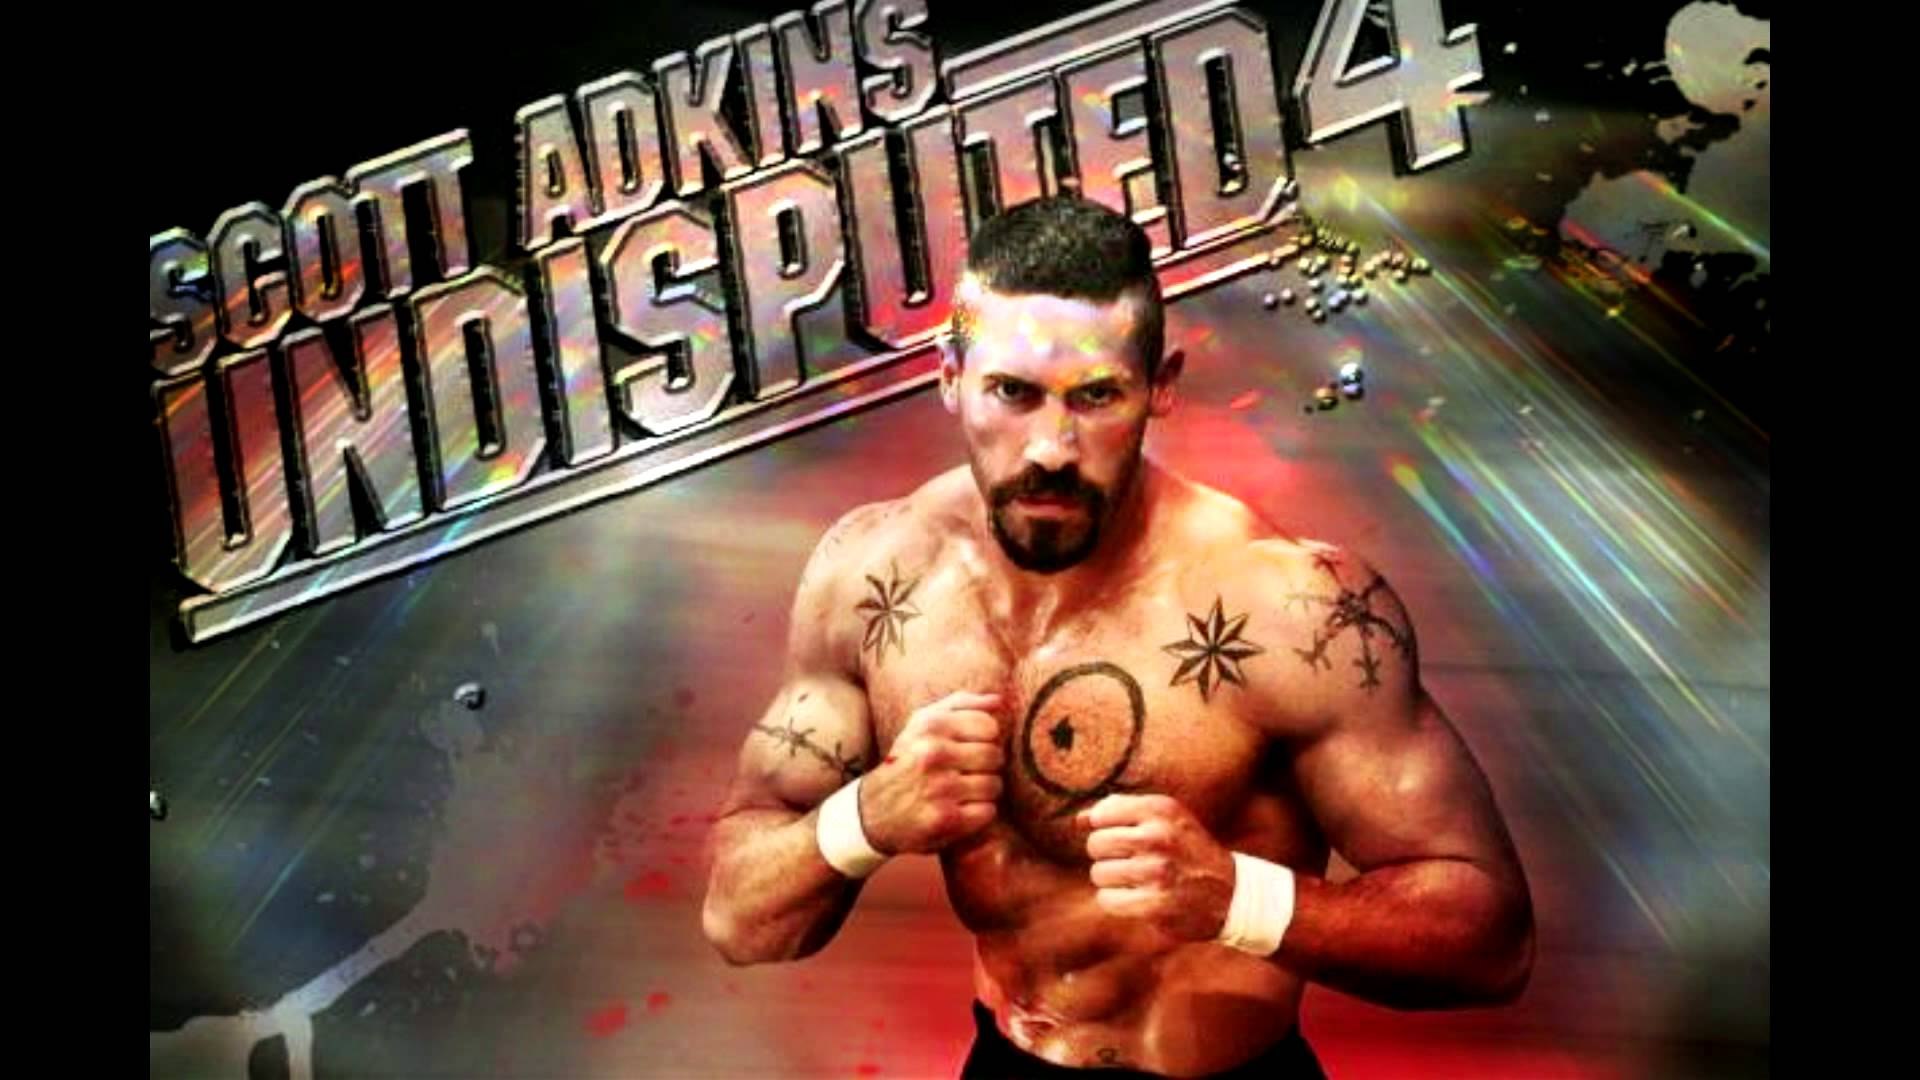 Boyka undisputed all fights